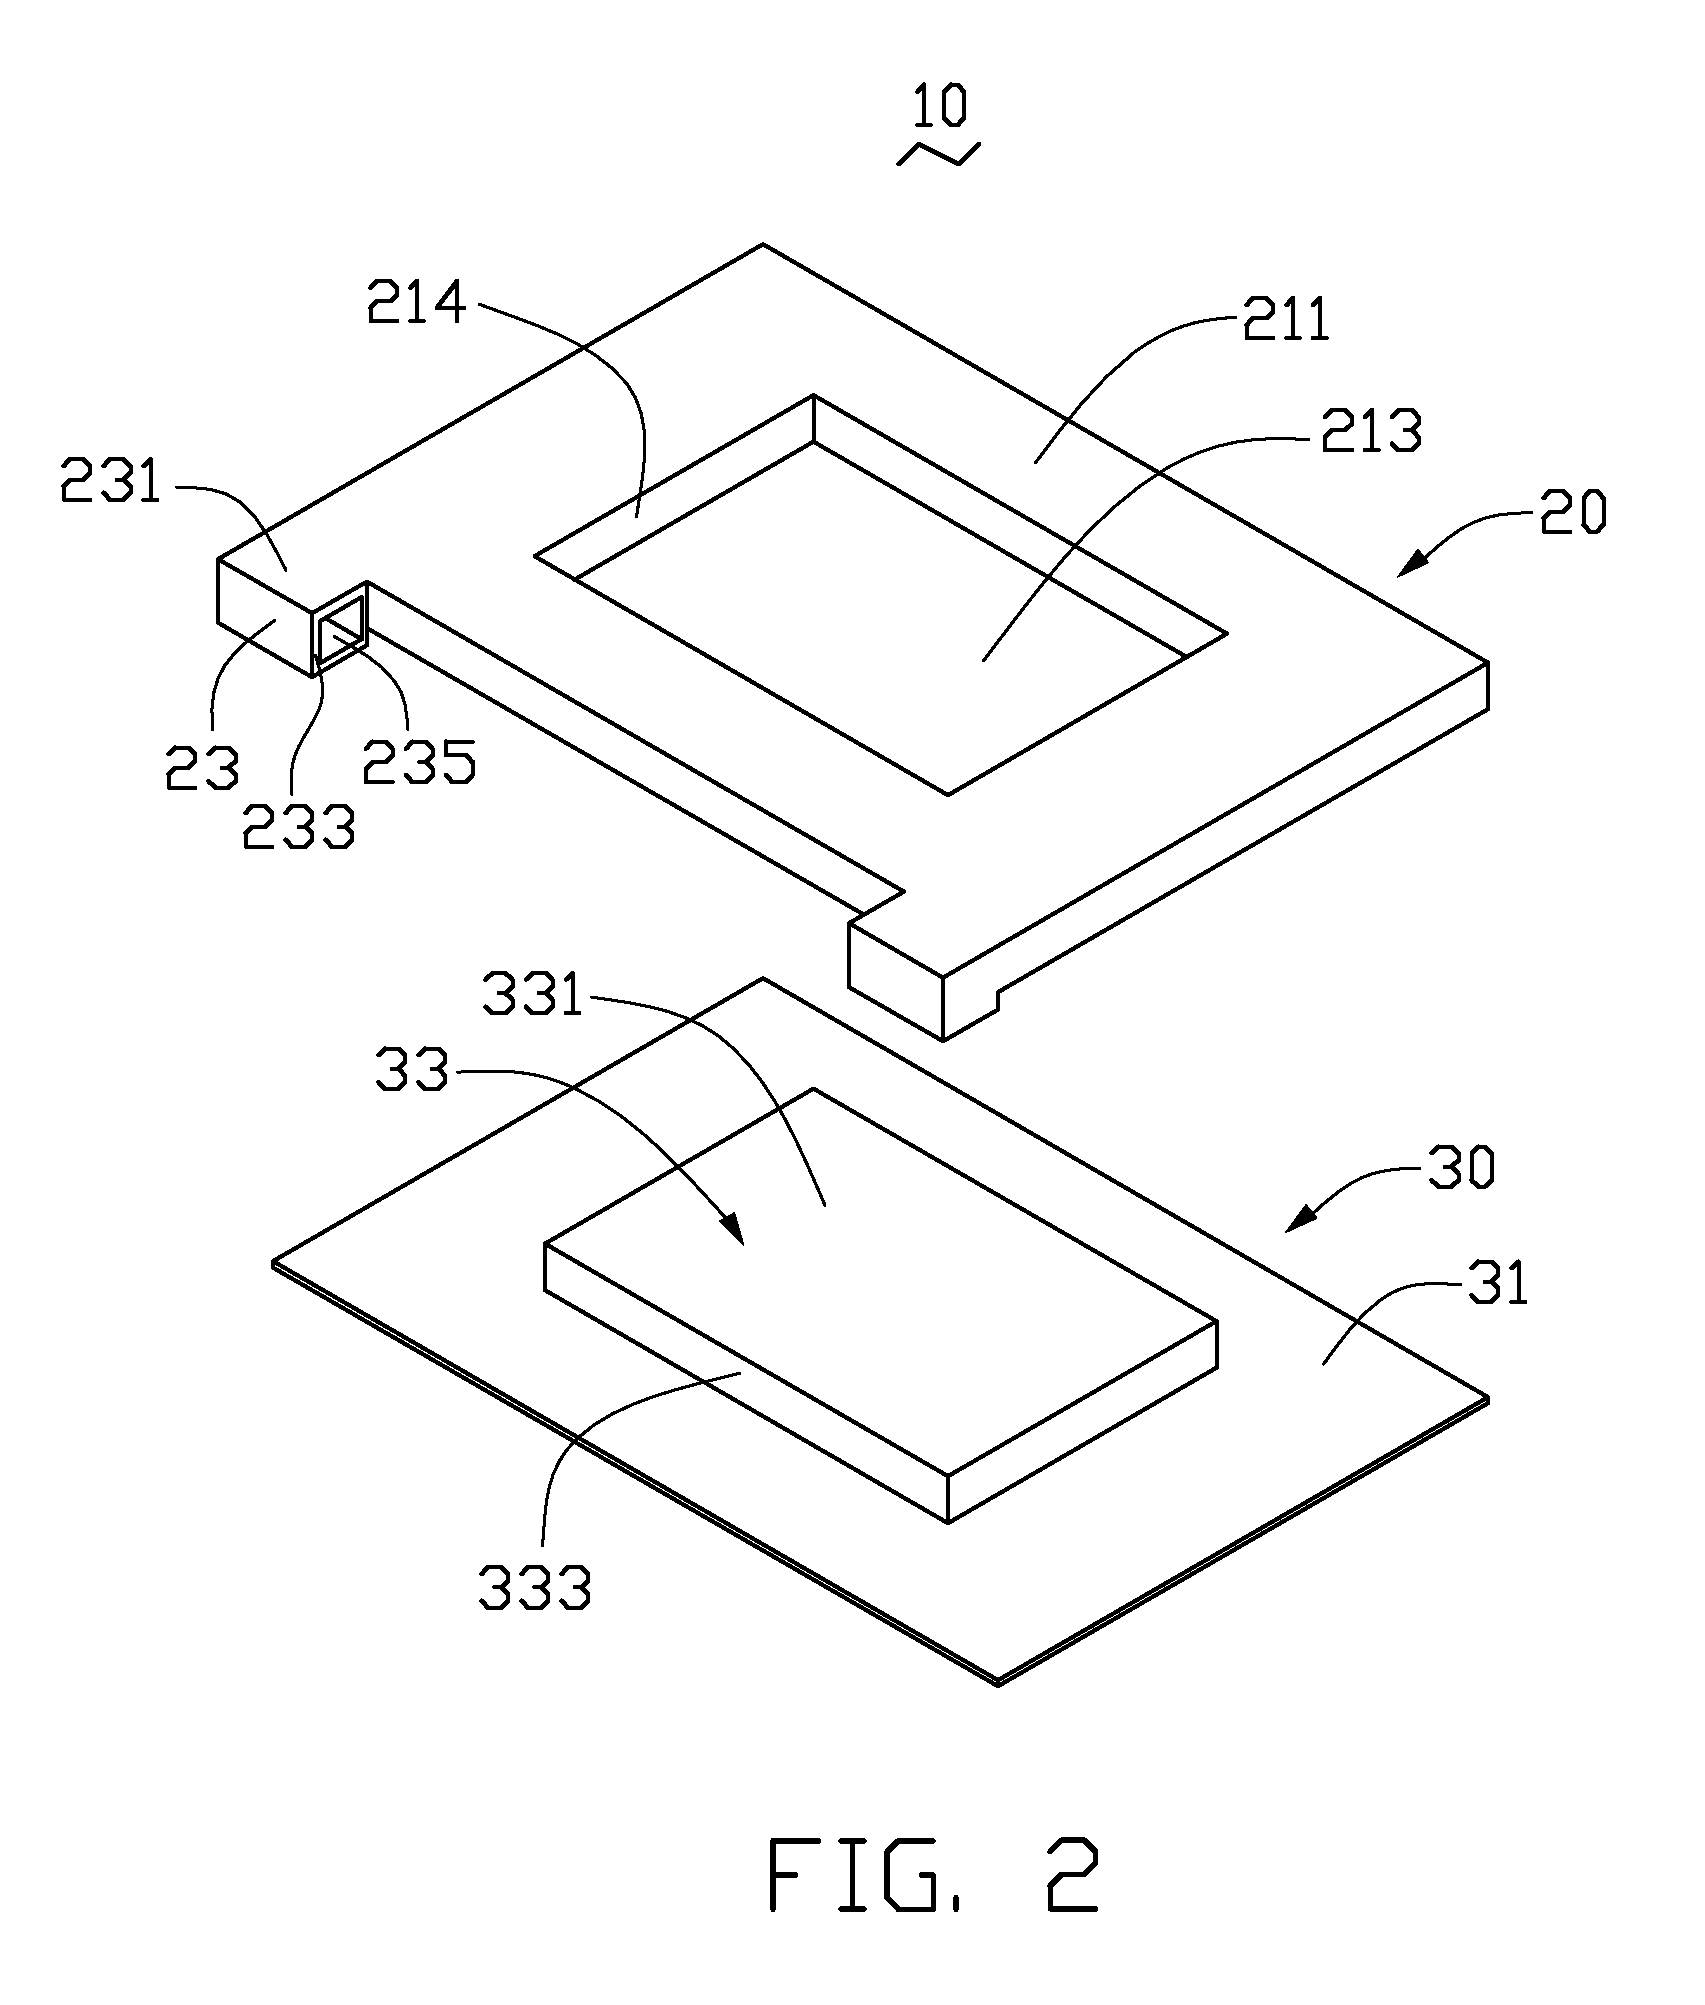 Dual-injection molding article and method for making same